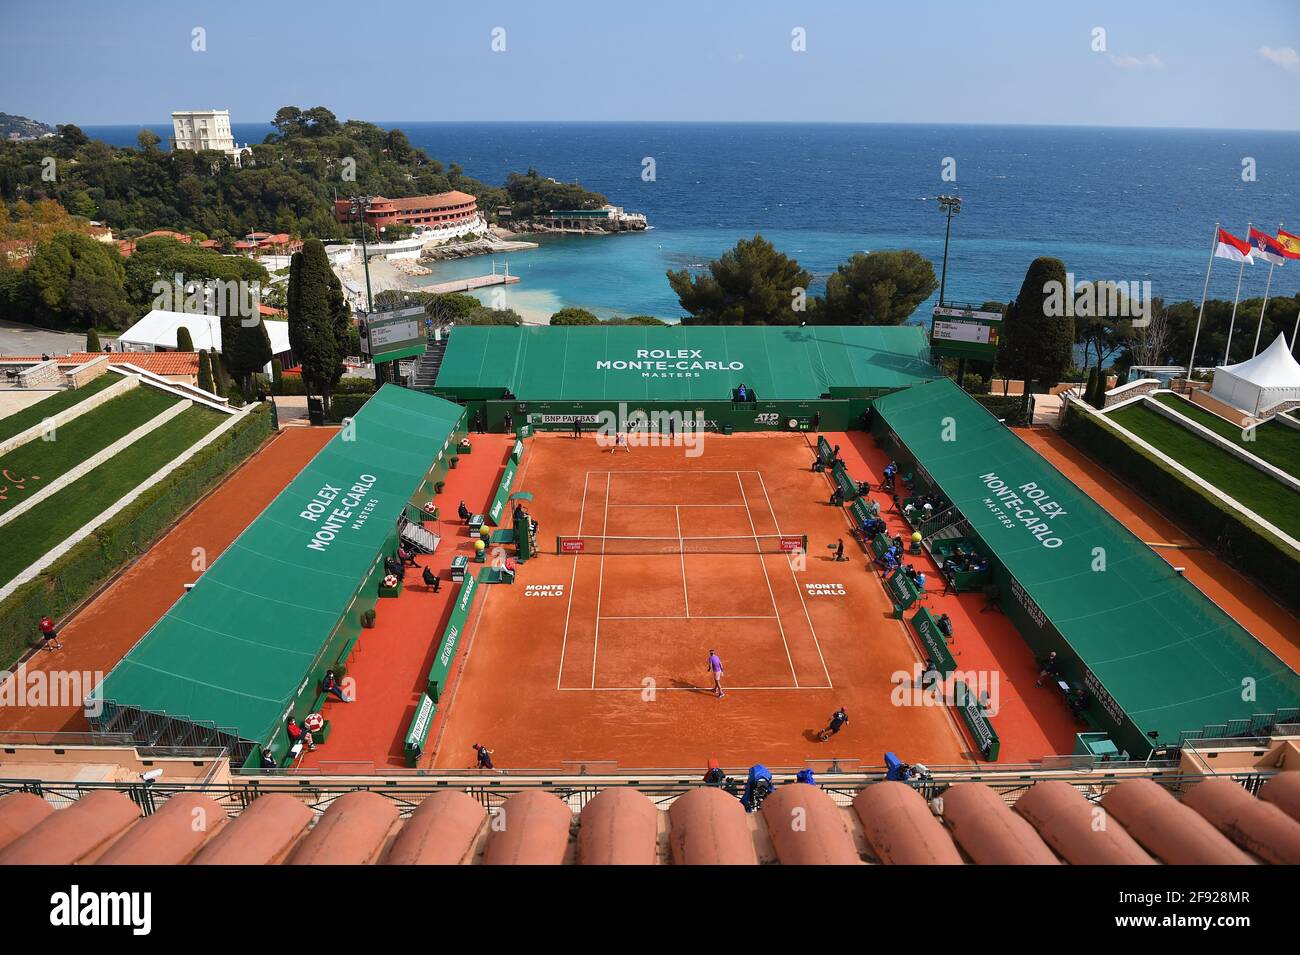 Ambiance at the Monaco Rolex Masters in Monte Carlo on April 15, 2021.  Photo by Corinne Dubreuil/ABACAPRESS.COM Stock Photo - Alamy